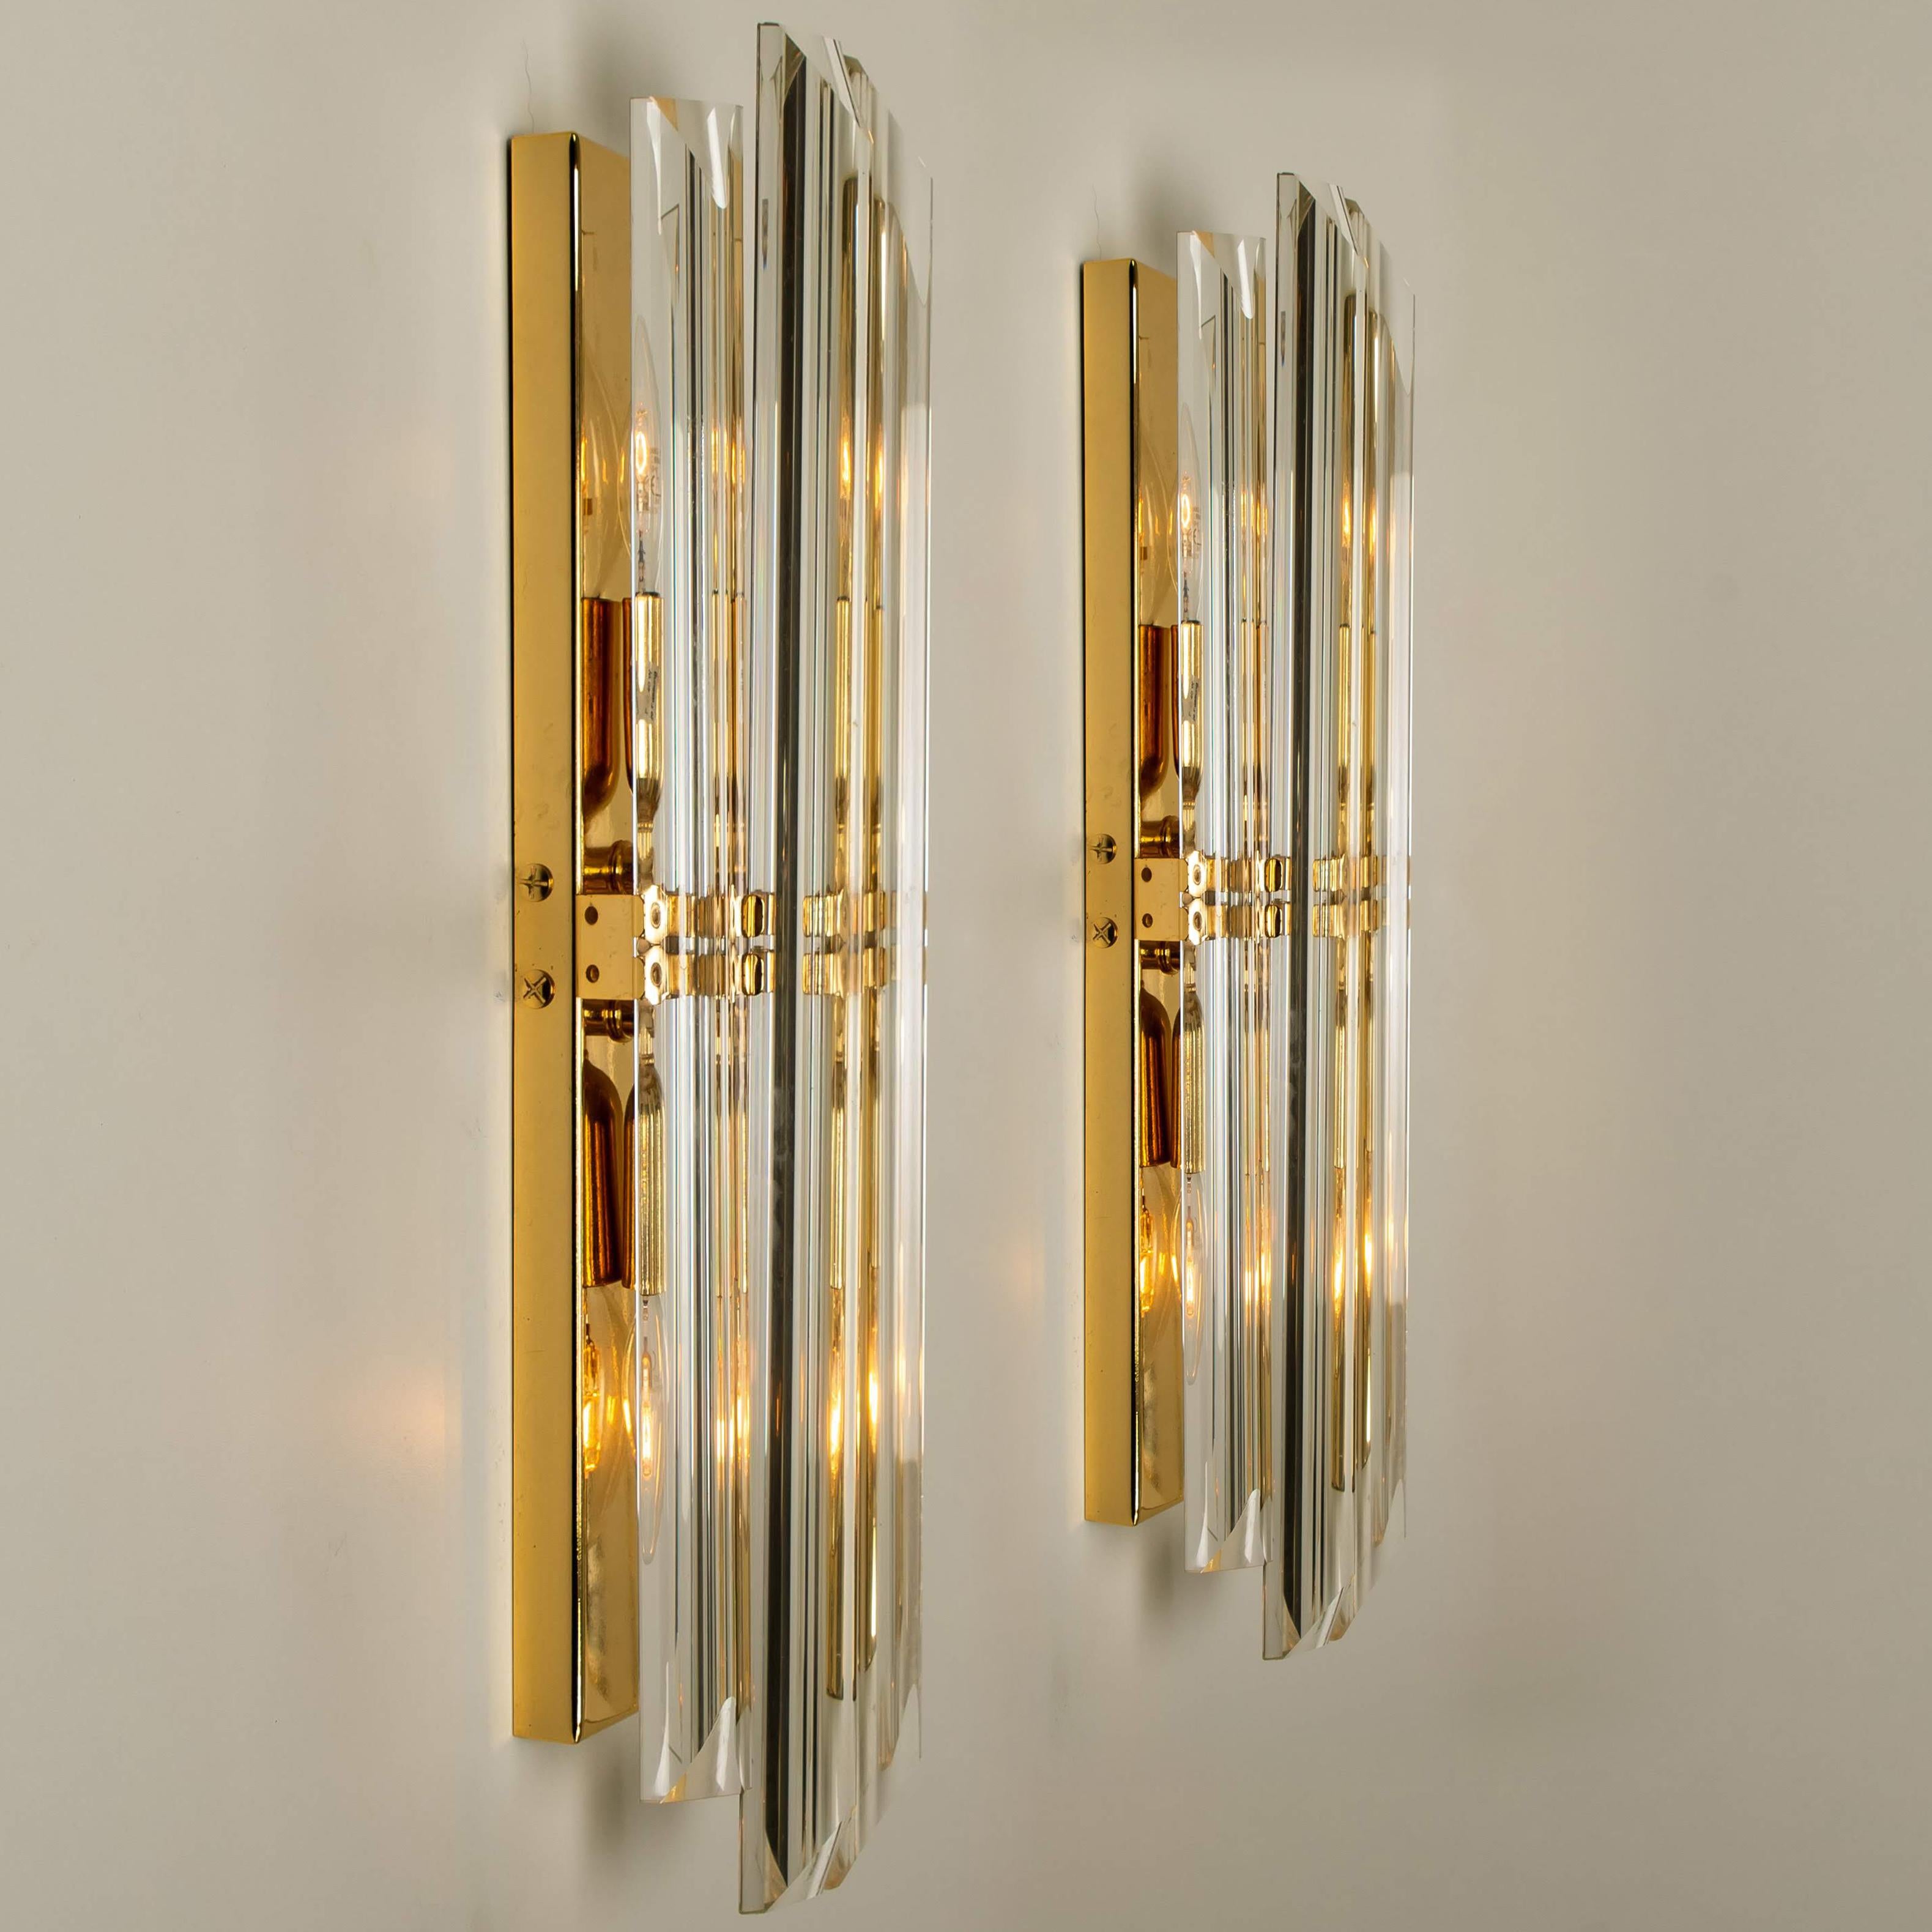 1 of the 5 Murano wall sconces each wall sconce is featuring four crystal clear glass 